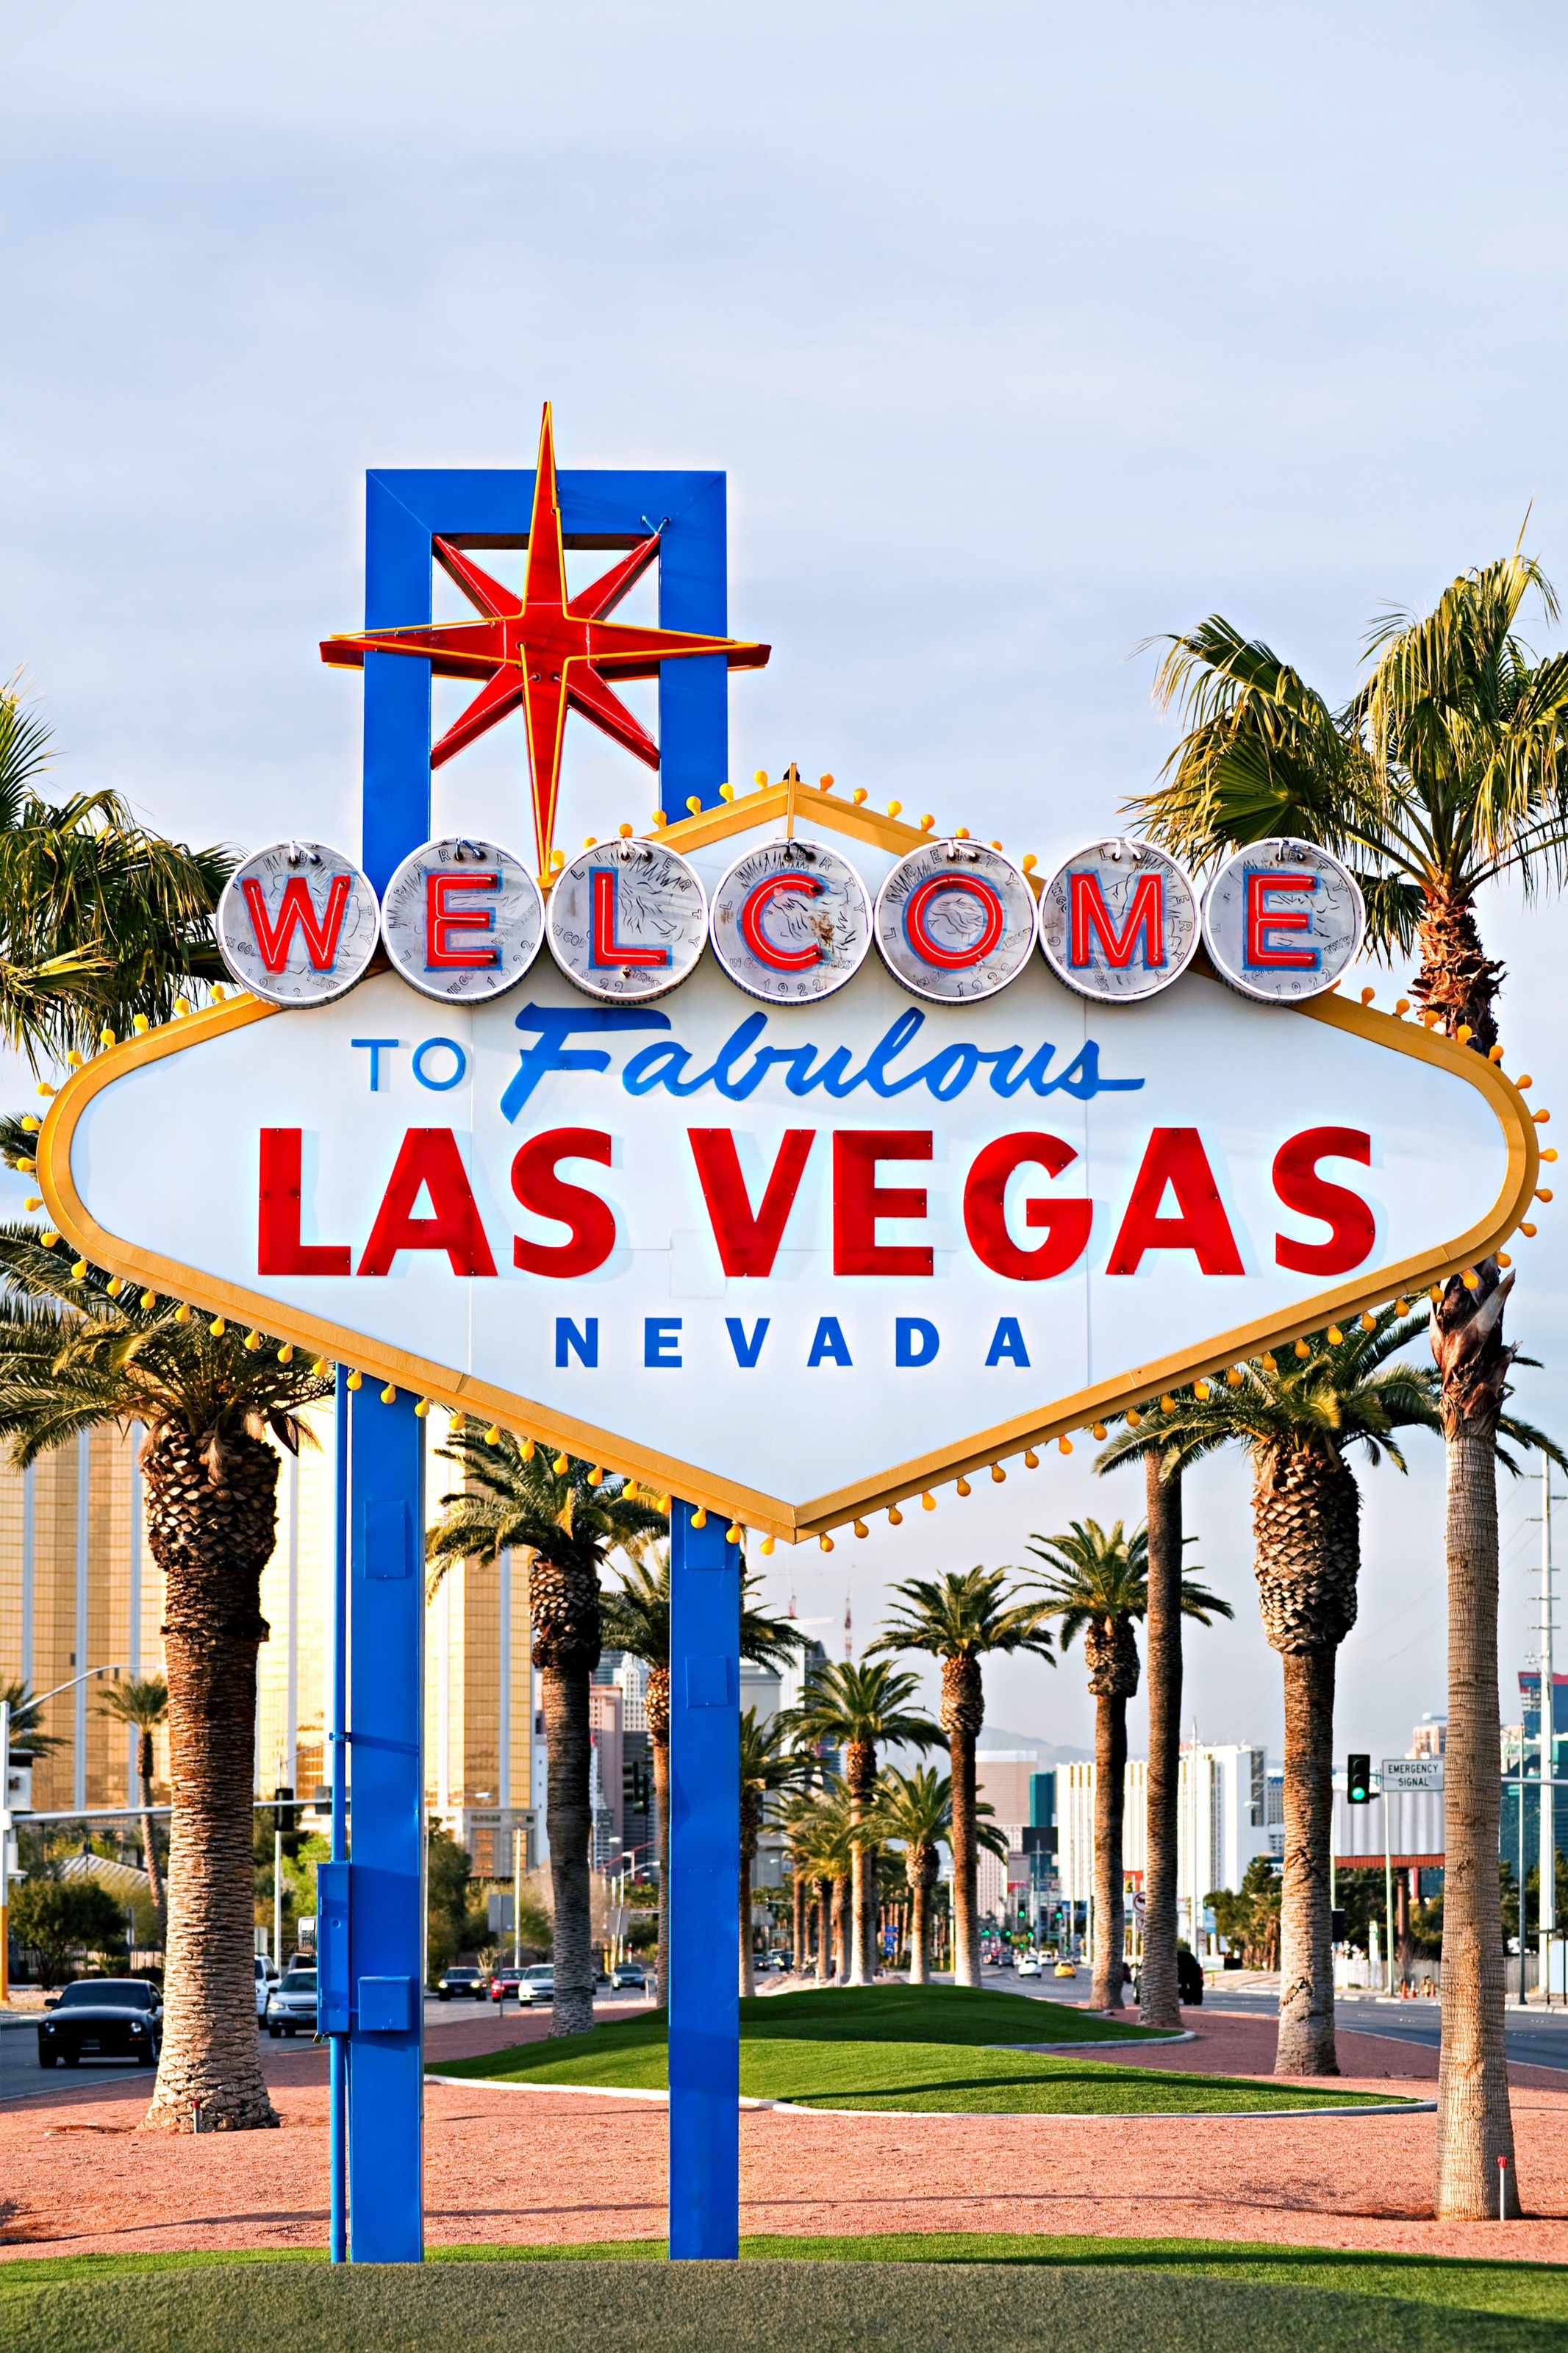 Wall Mural - Welcome to Las Vegas Sign at Sunset Wallpaper - Wallsauce